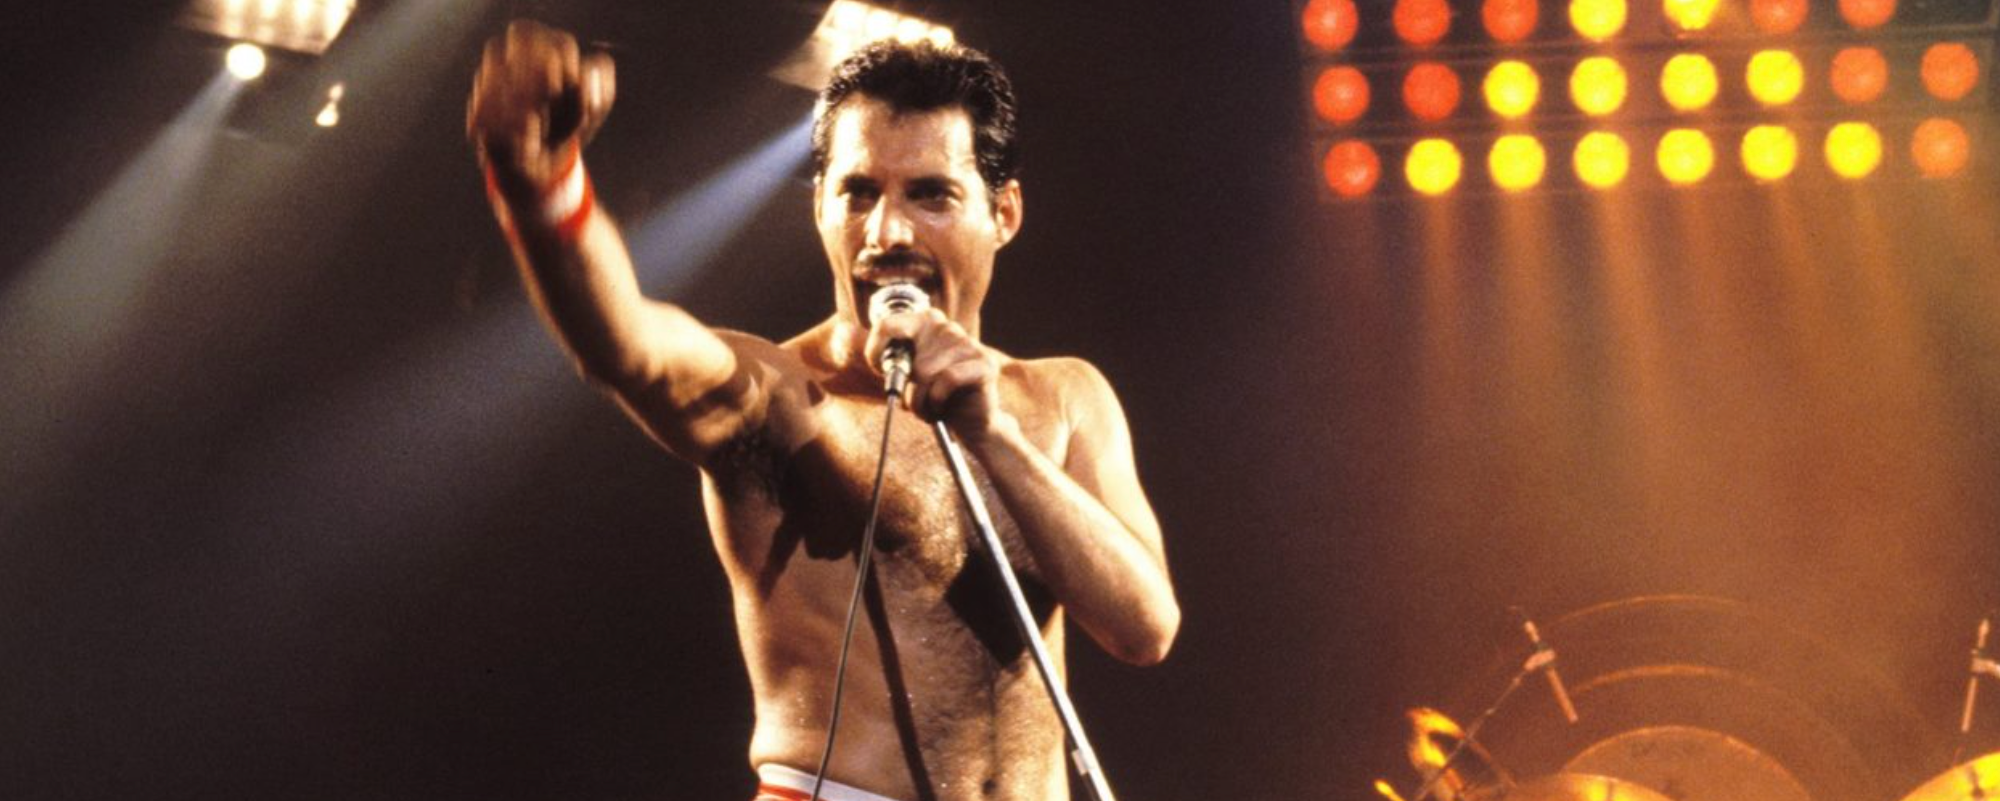 Final Years of Queen Frontman to Be Released in New Documentary, ‘Freddie Mercury: The Final Act’